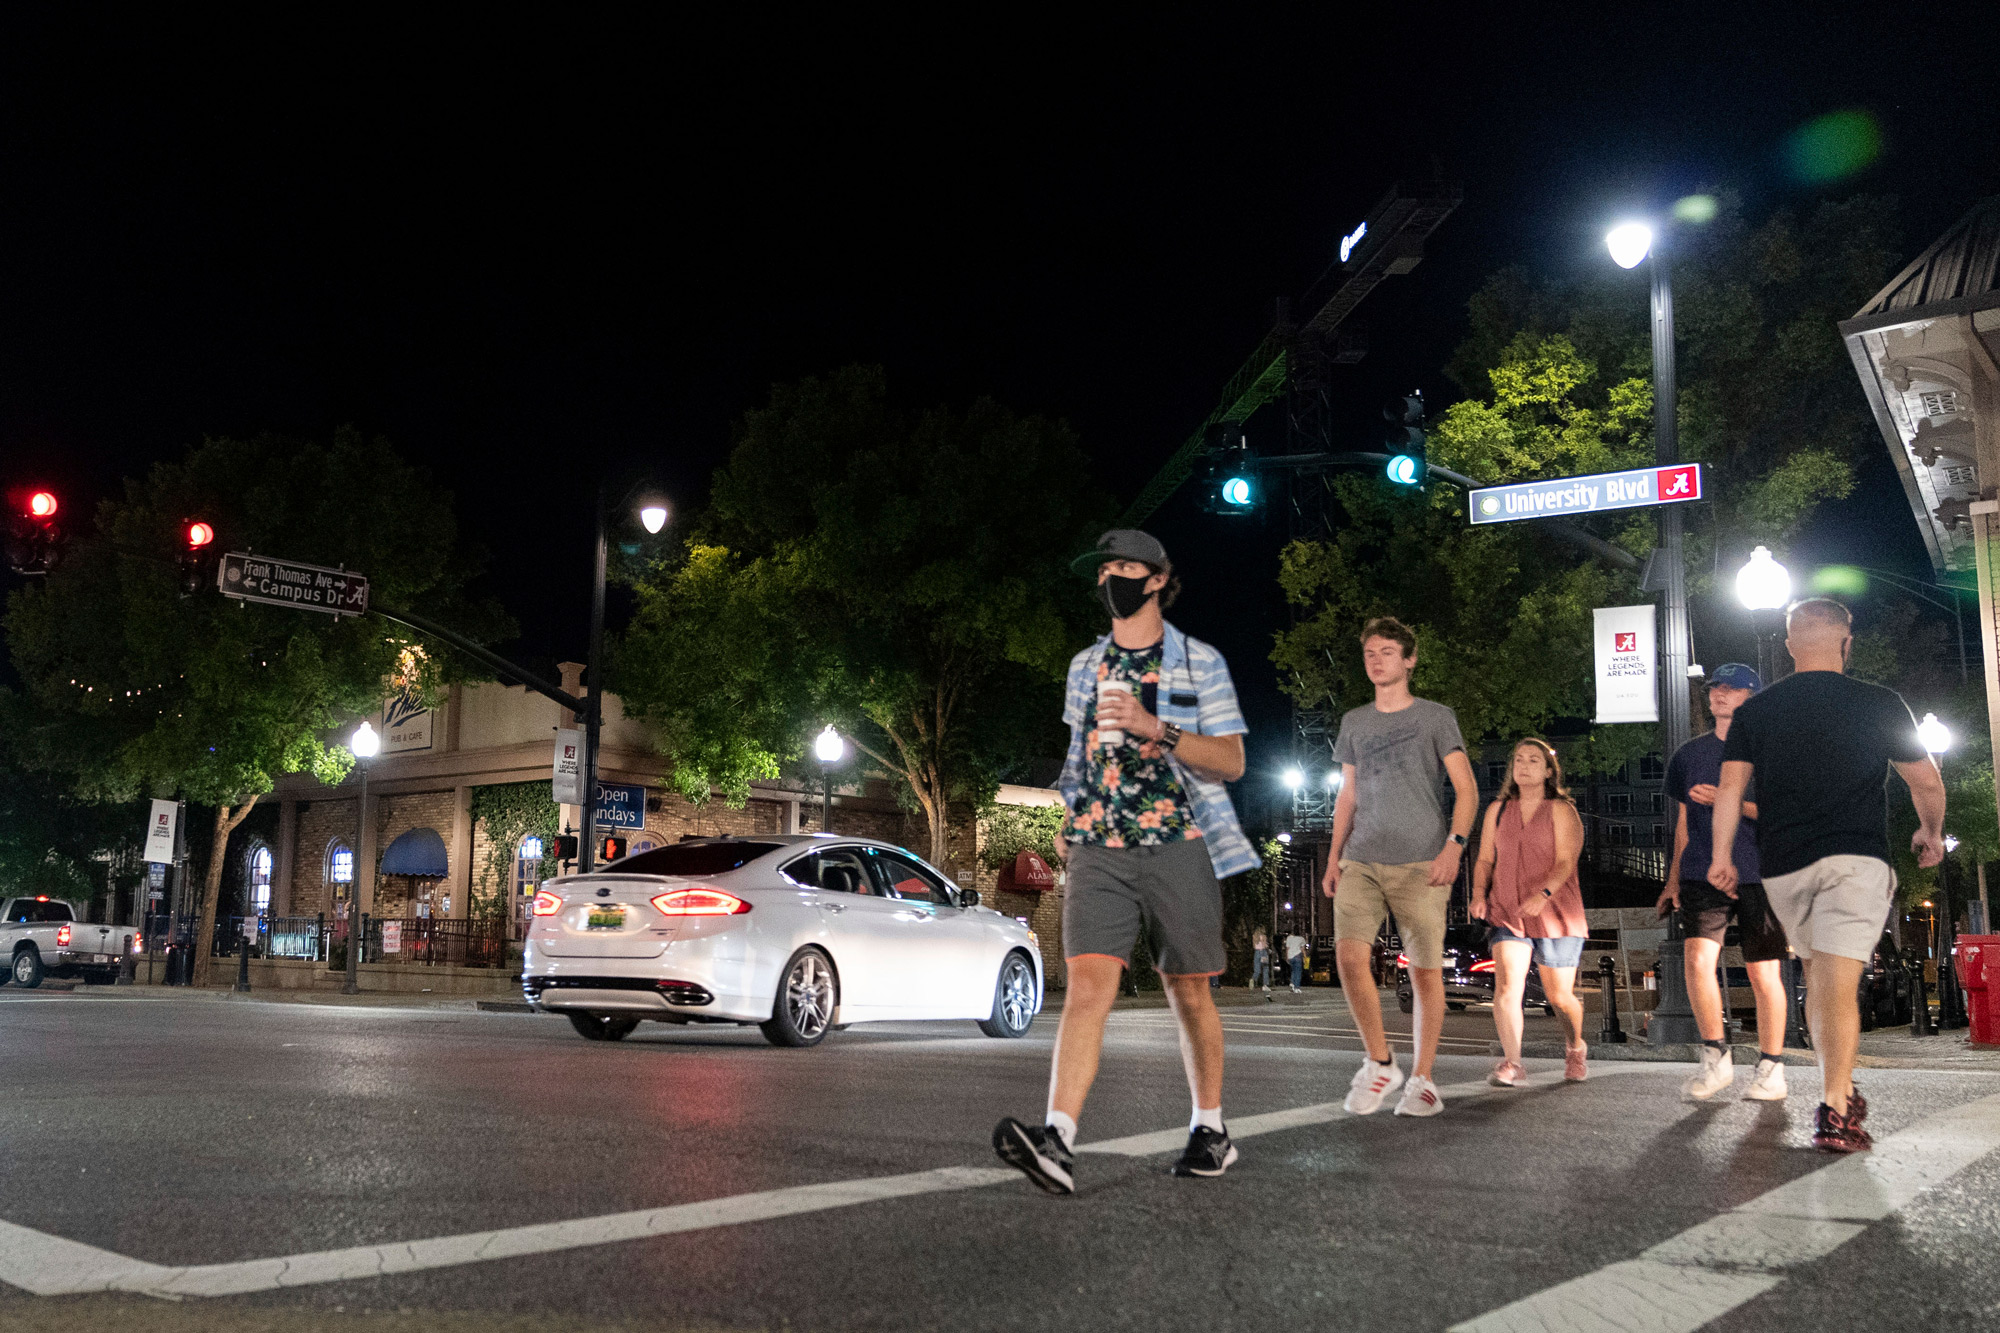 People make their way along The Strip, the University of Alabama's bar scene, on August 15 in Tuscaloosa, Alabama.